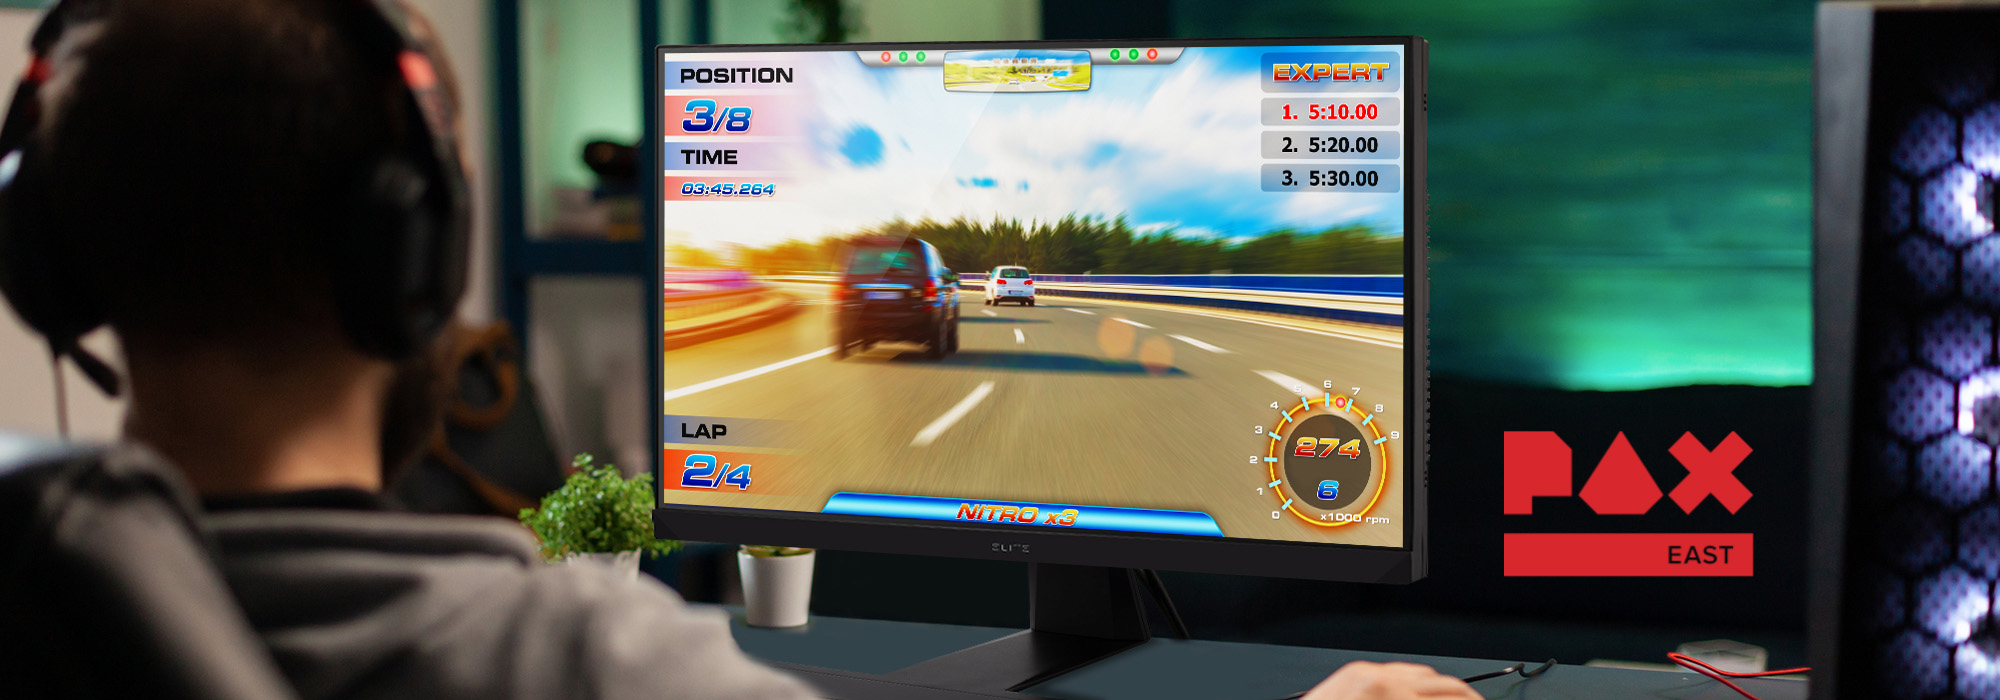 ViewSonic Showcases Breadth and Depth of ELITE Gaming Monitors at PAX East